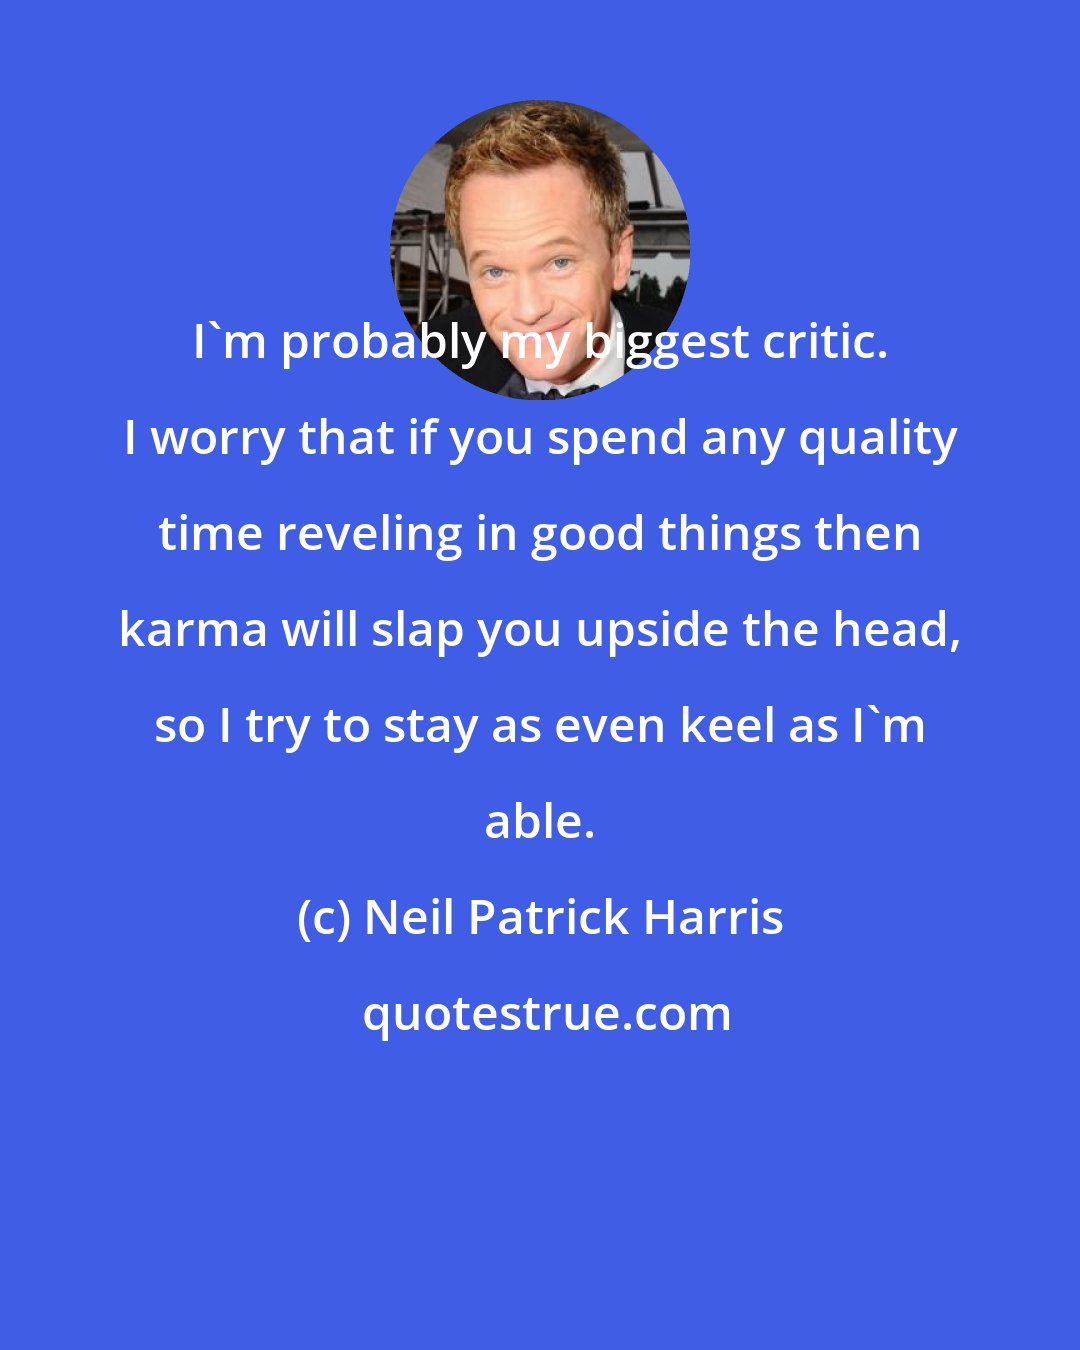 Neil Patrick Harris: I'm probably my biggest critic. I worry that if you spend any quality time reveling in good things then karma will slap you upside the head, so I try to stay as even keel as I'm able.